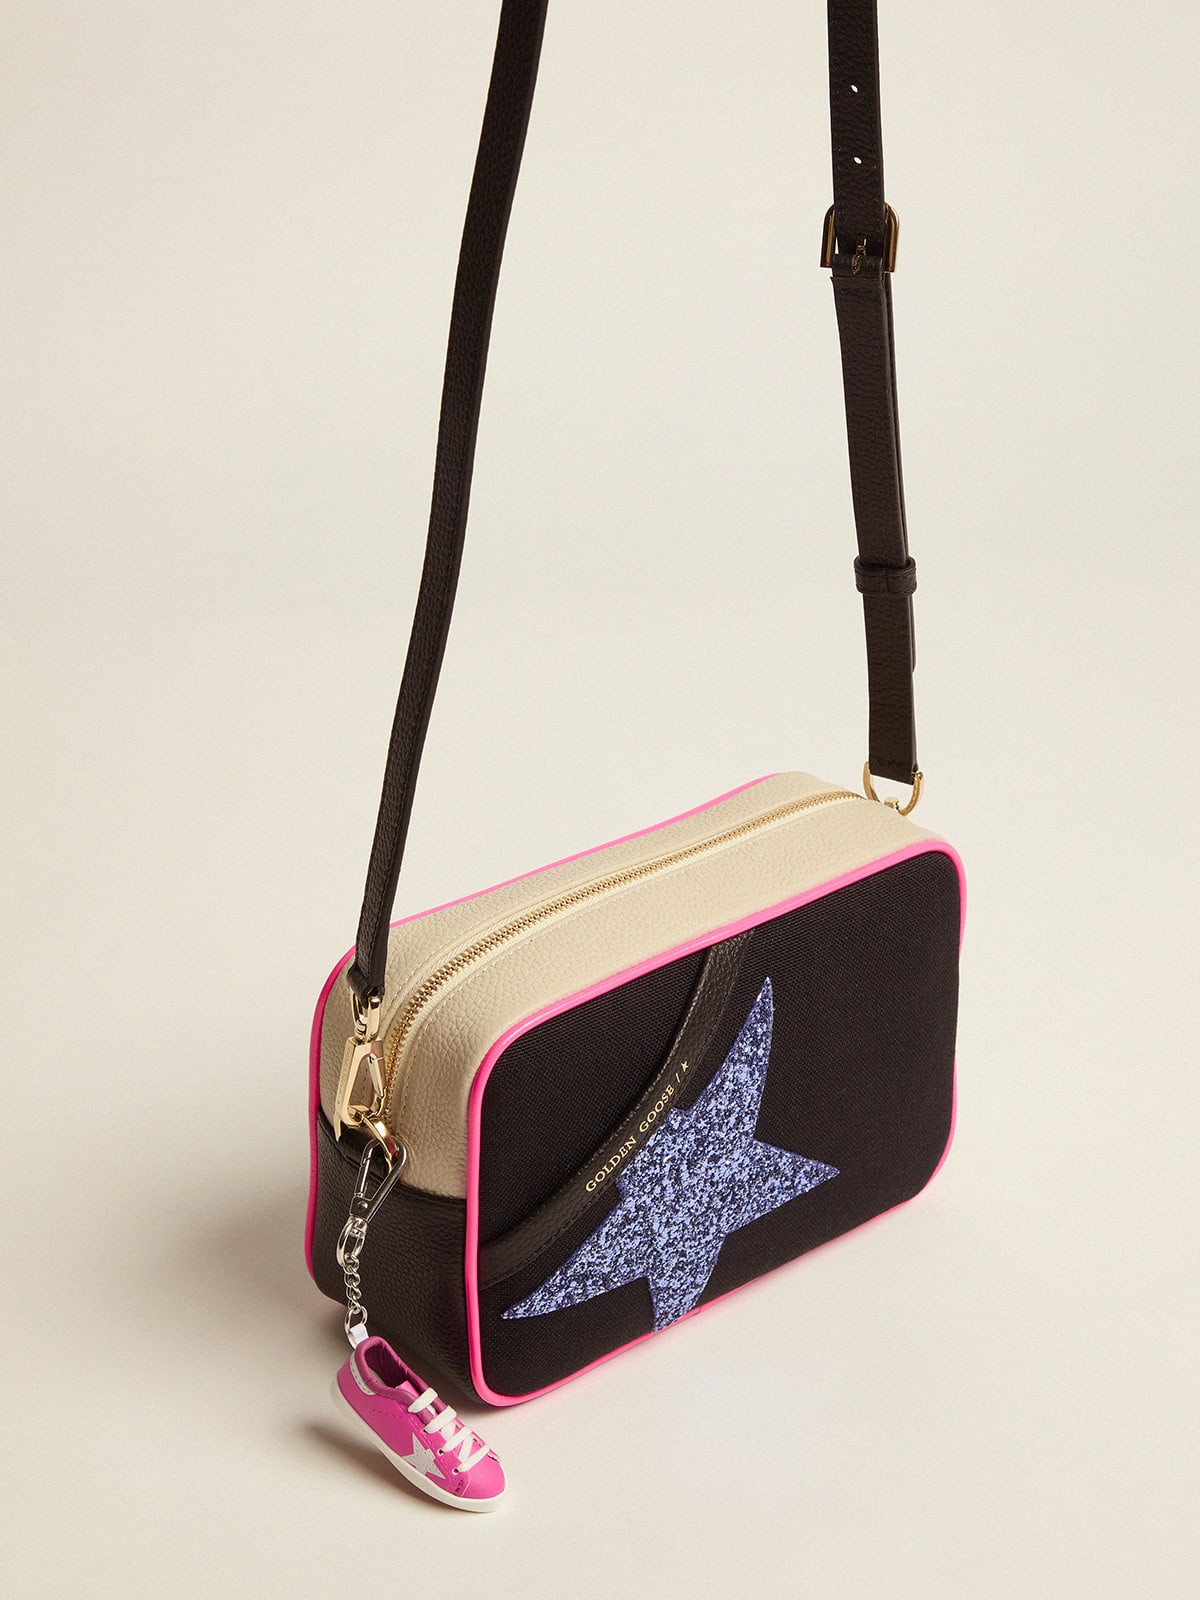 Golden Goose - Star Bag in canvas with inserts in white milk hammered leather and purple glitter star in 